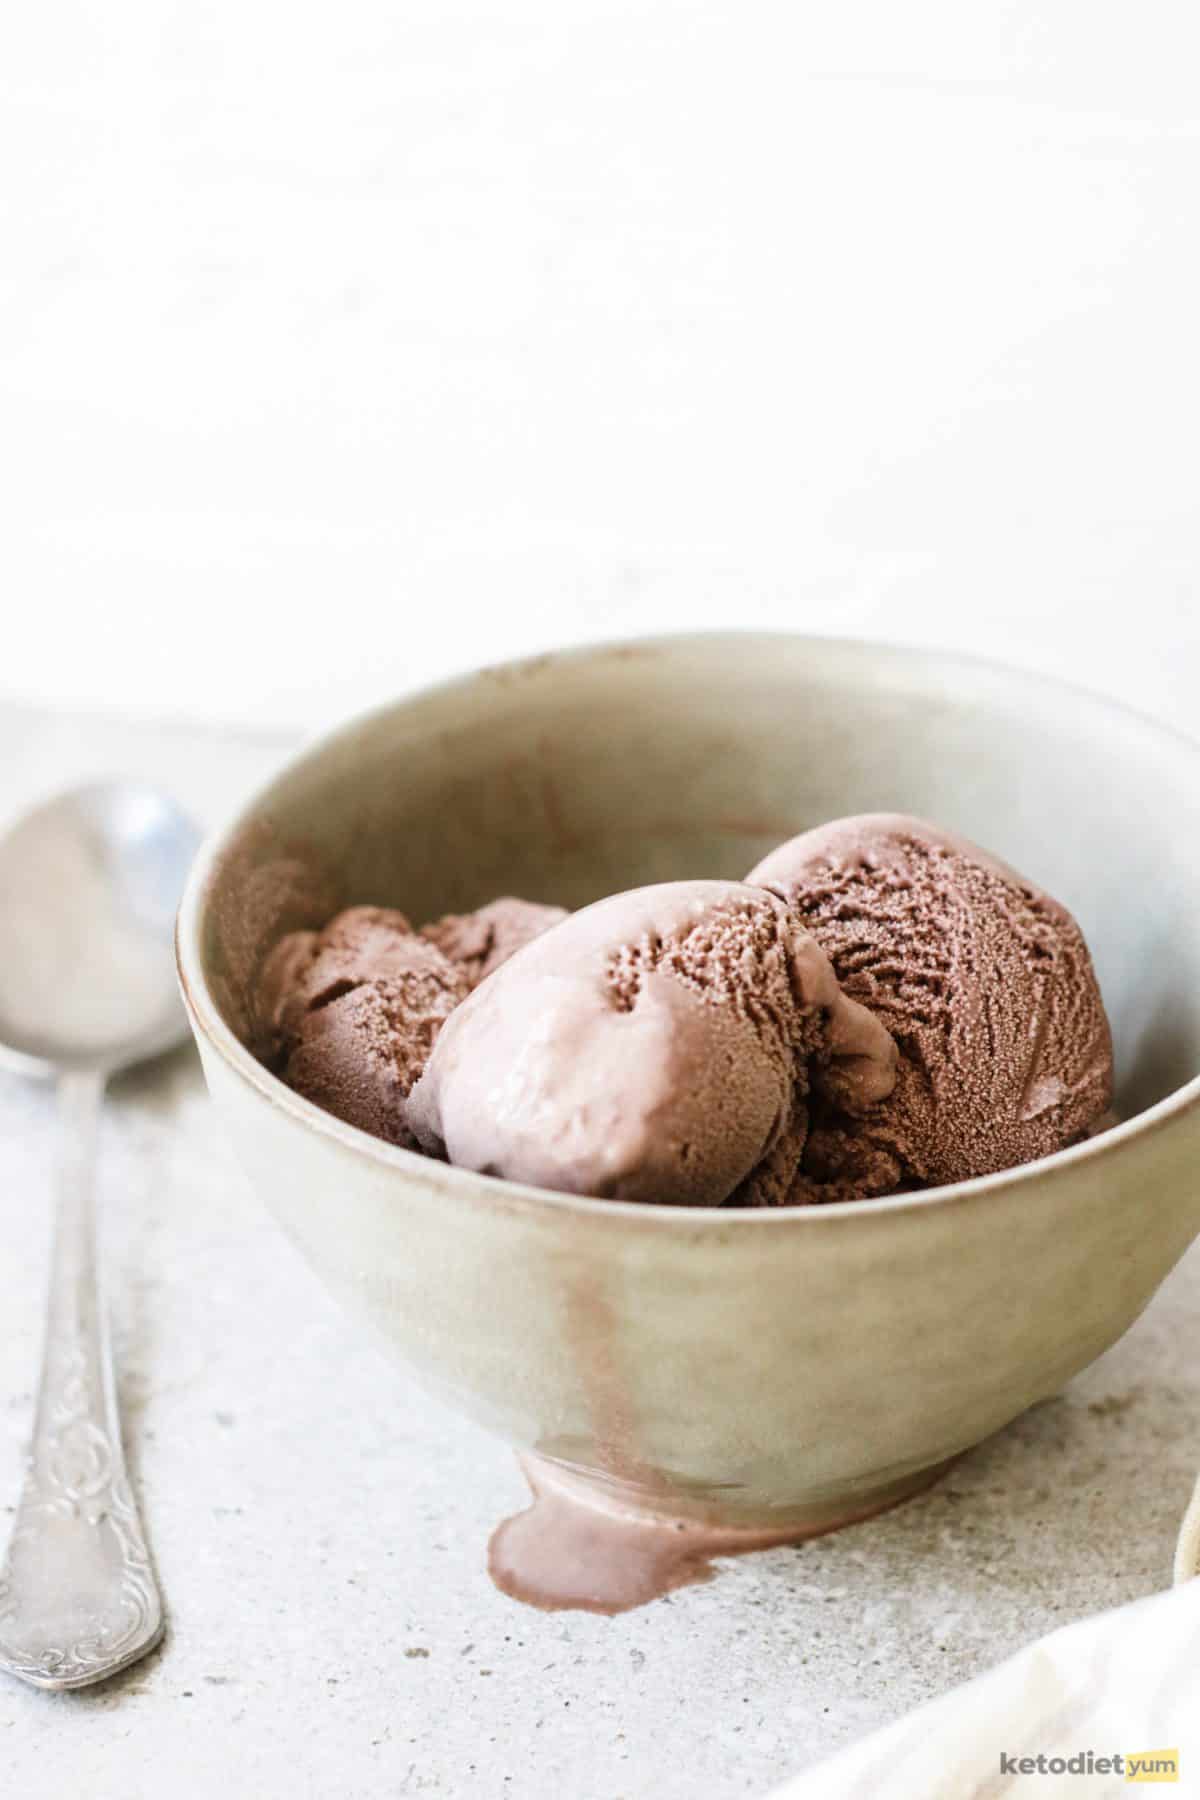 Keto coffee ice cream served in a bowl with a spoon